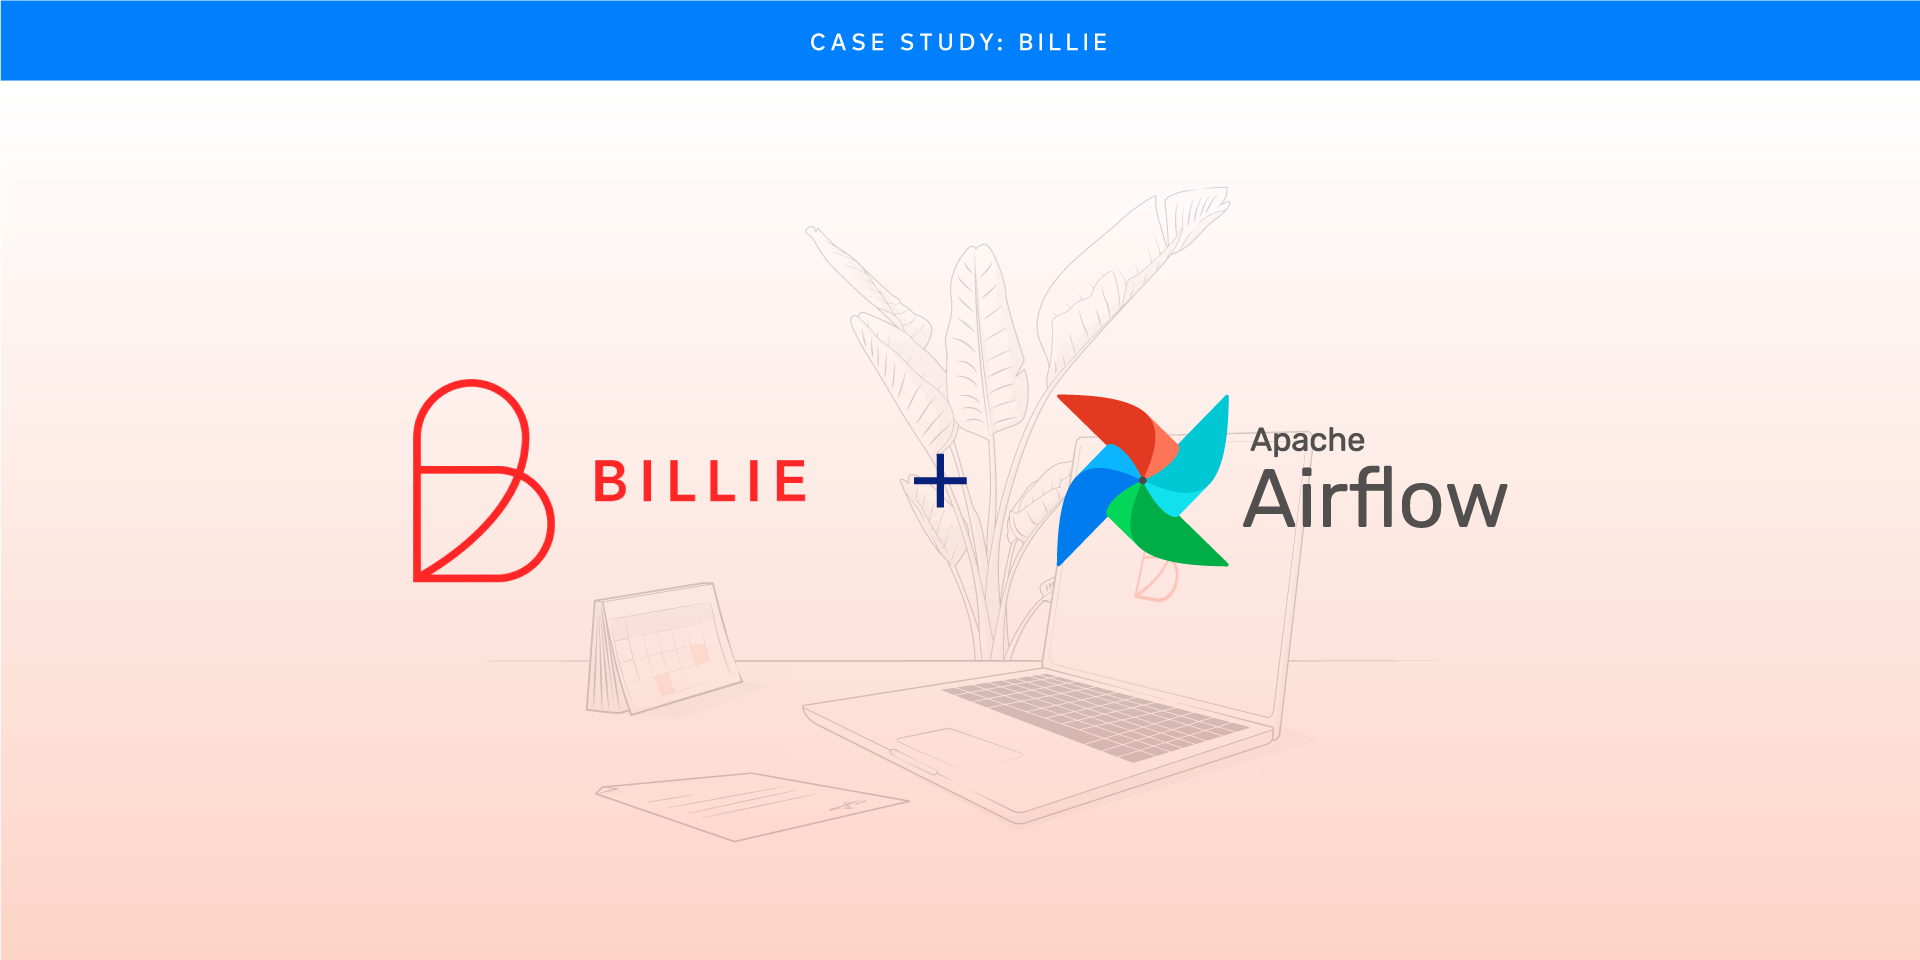 Billie saves up to 20% warehousing cost with Apache Airflow and Fivetran